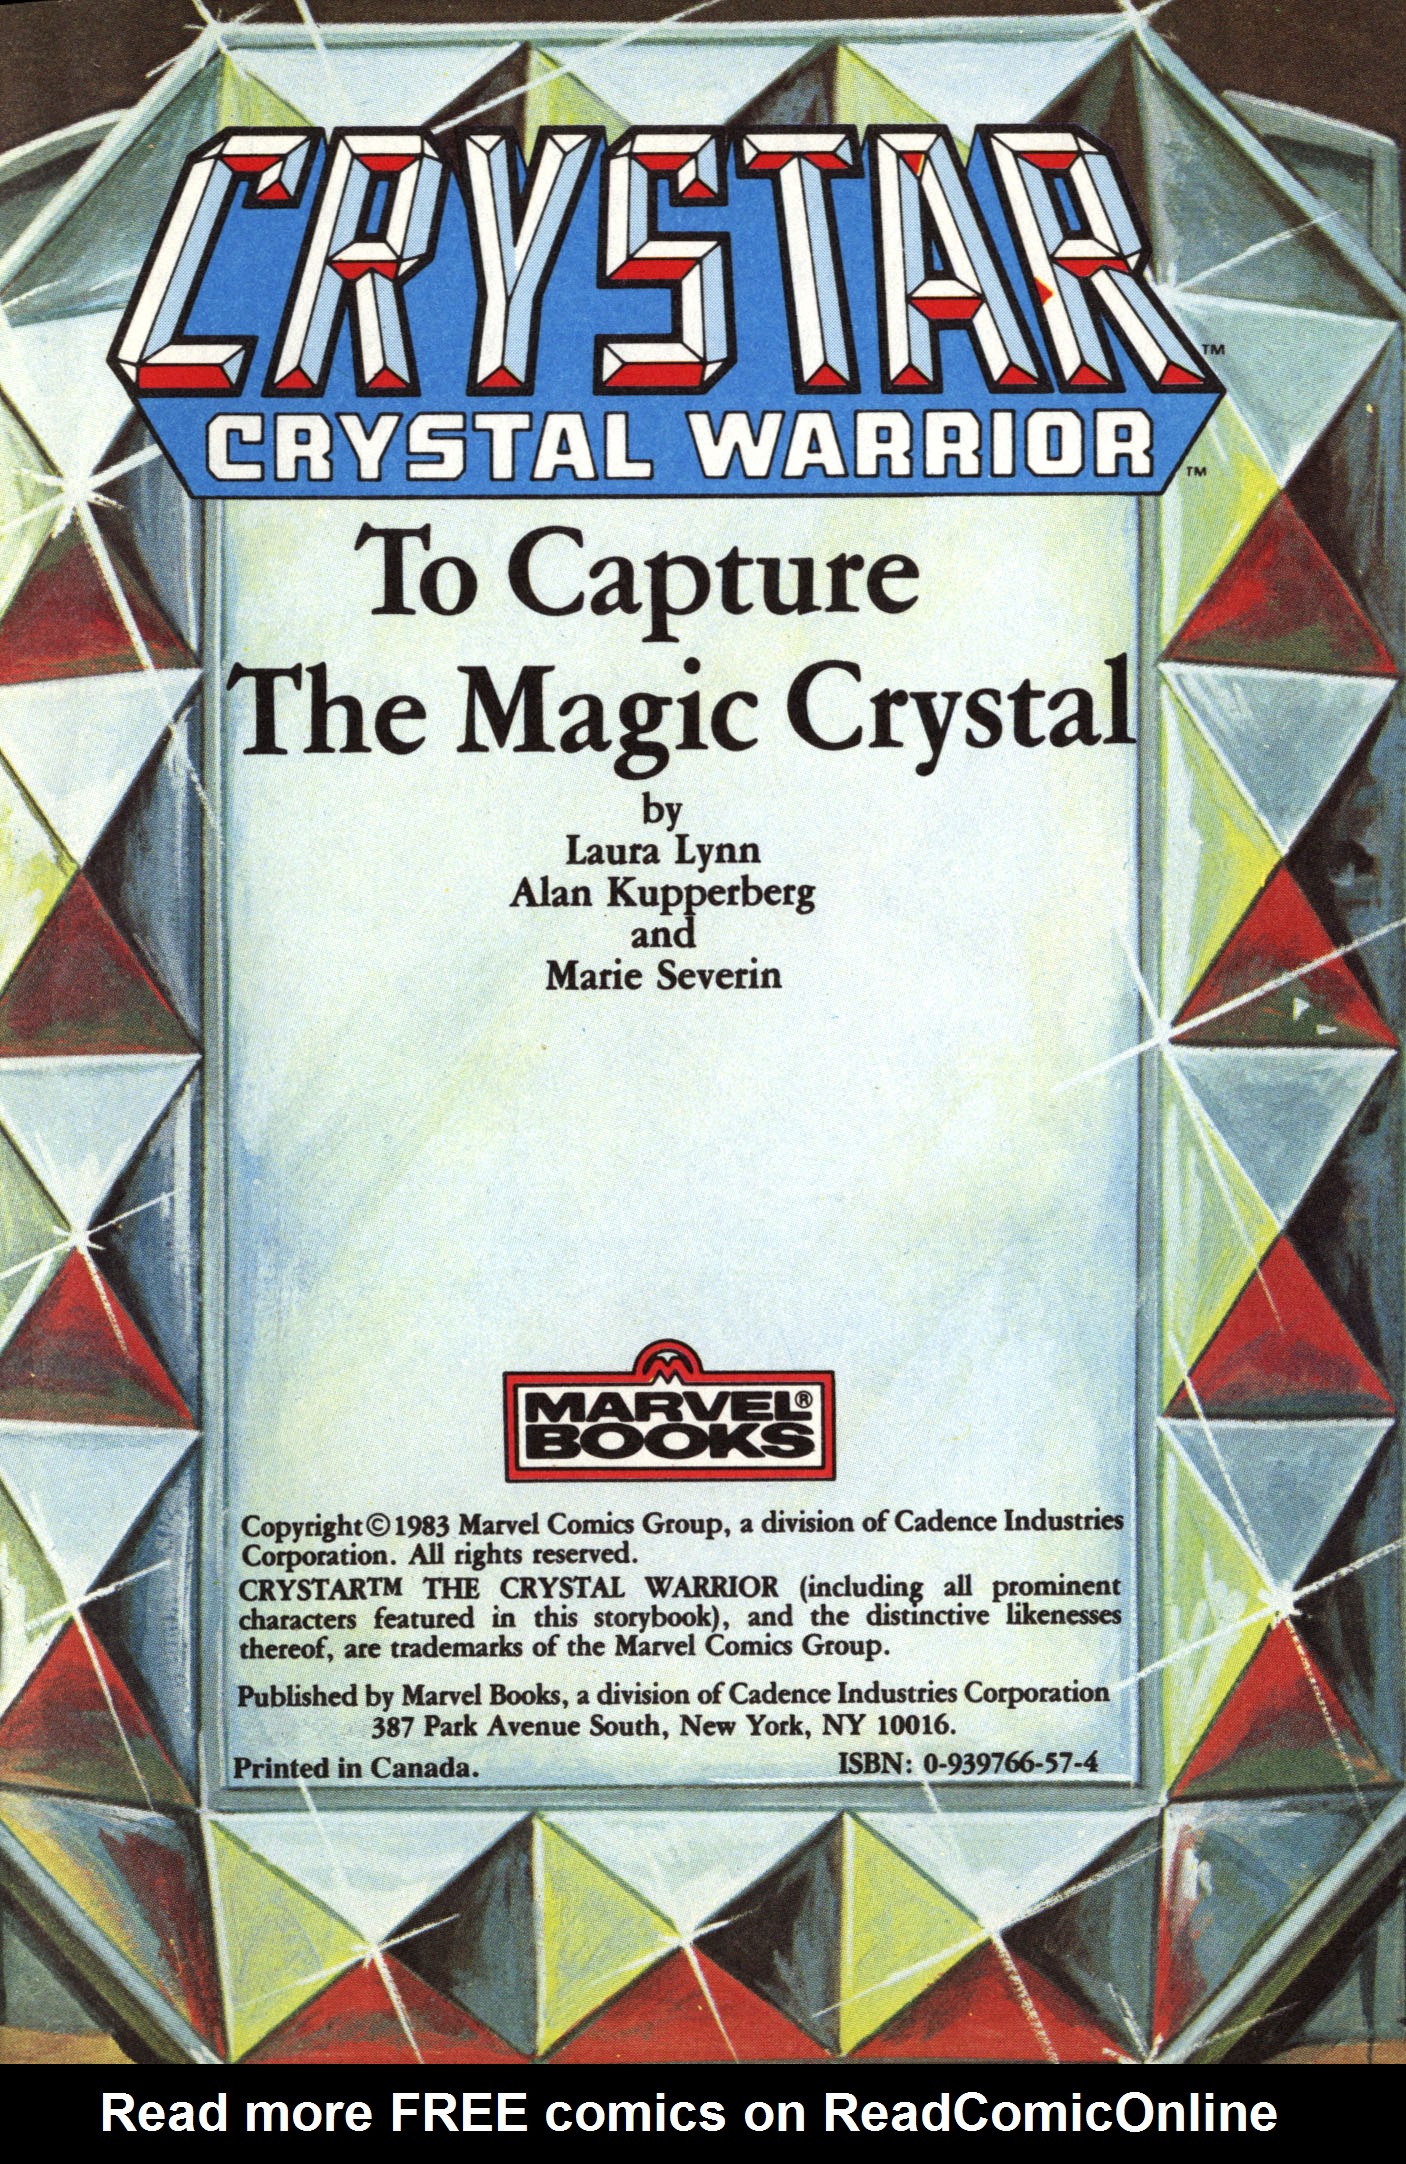 Read online Crystar Crystal Warrior: To Capture the Magic Crystal comic -  Issue # Full - 3